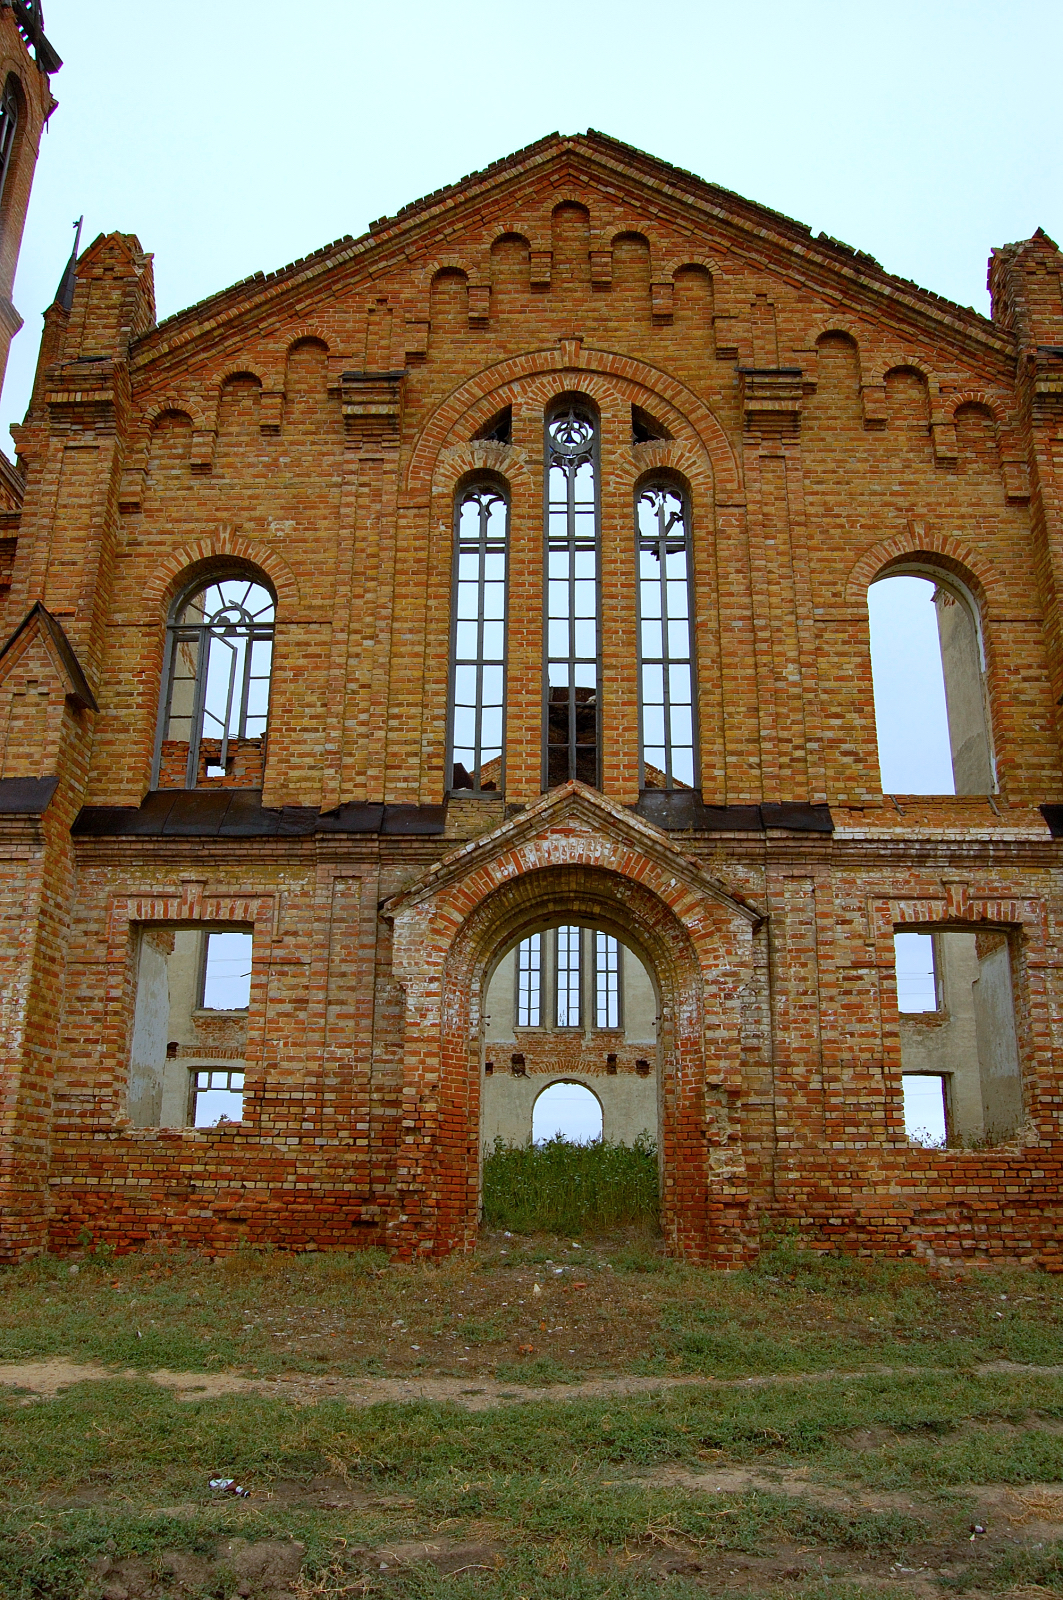 Side profile of the church is Messer. Source: Steve Schreiber (2006).